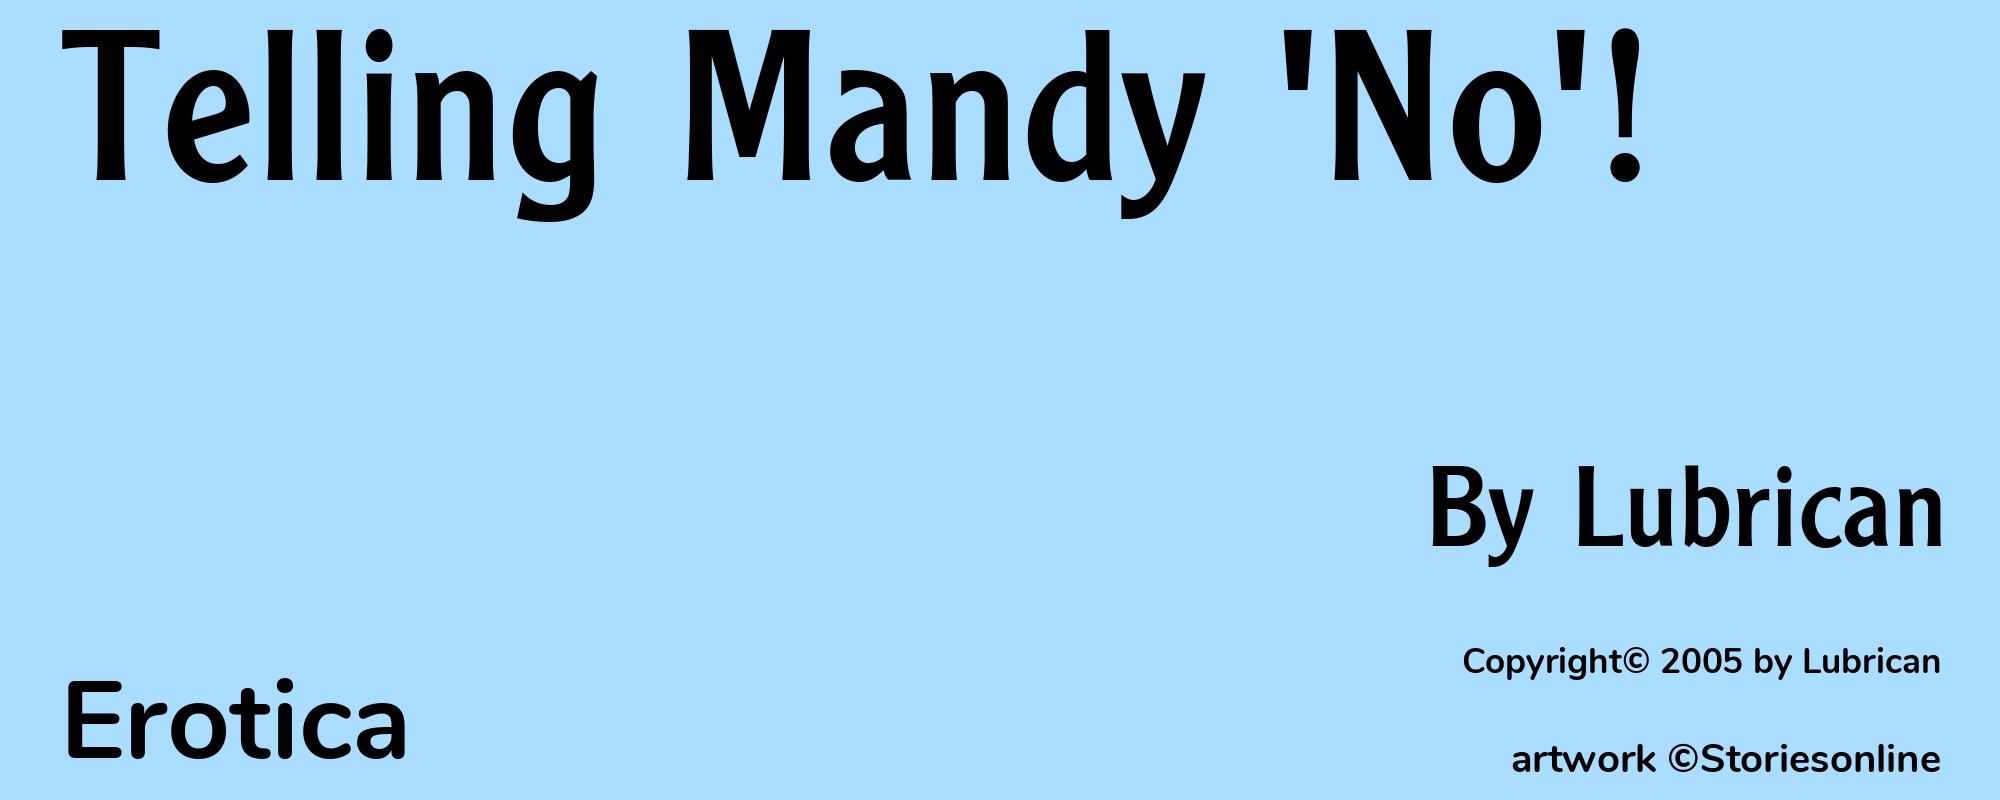 Telling Mandy 'No'! - Cover